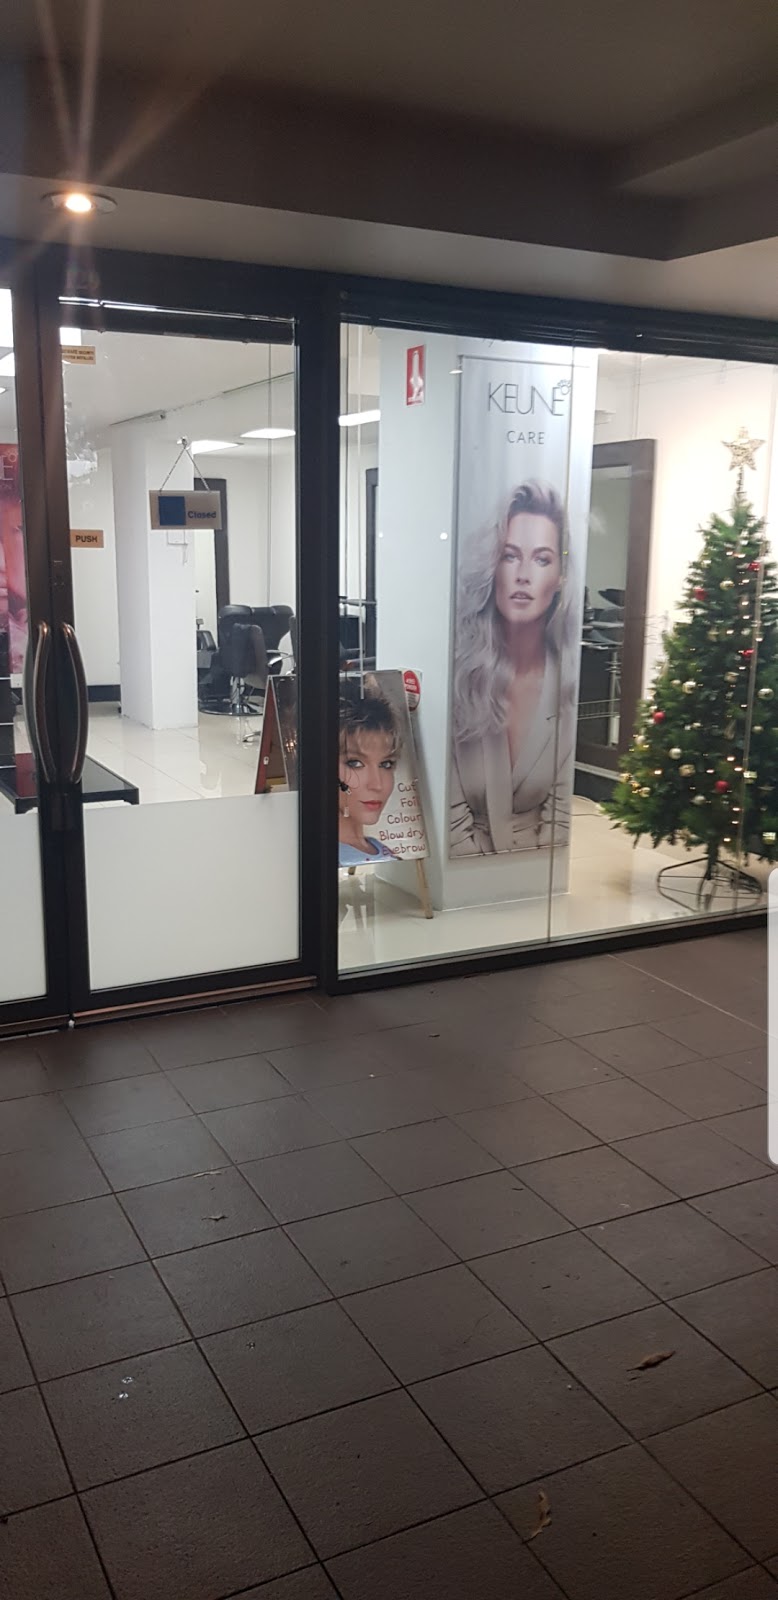 Mr. Scissors Cut Hair and Beauty Salon | hair care | 129/121-133 Pacific Hwy, Hornsby NSW 2077, Australia | 0432450676 OR +61 432 450 676